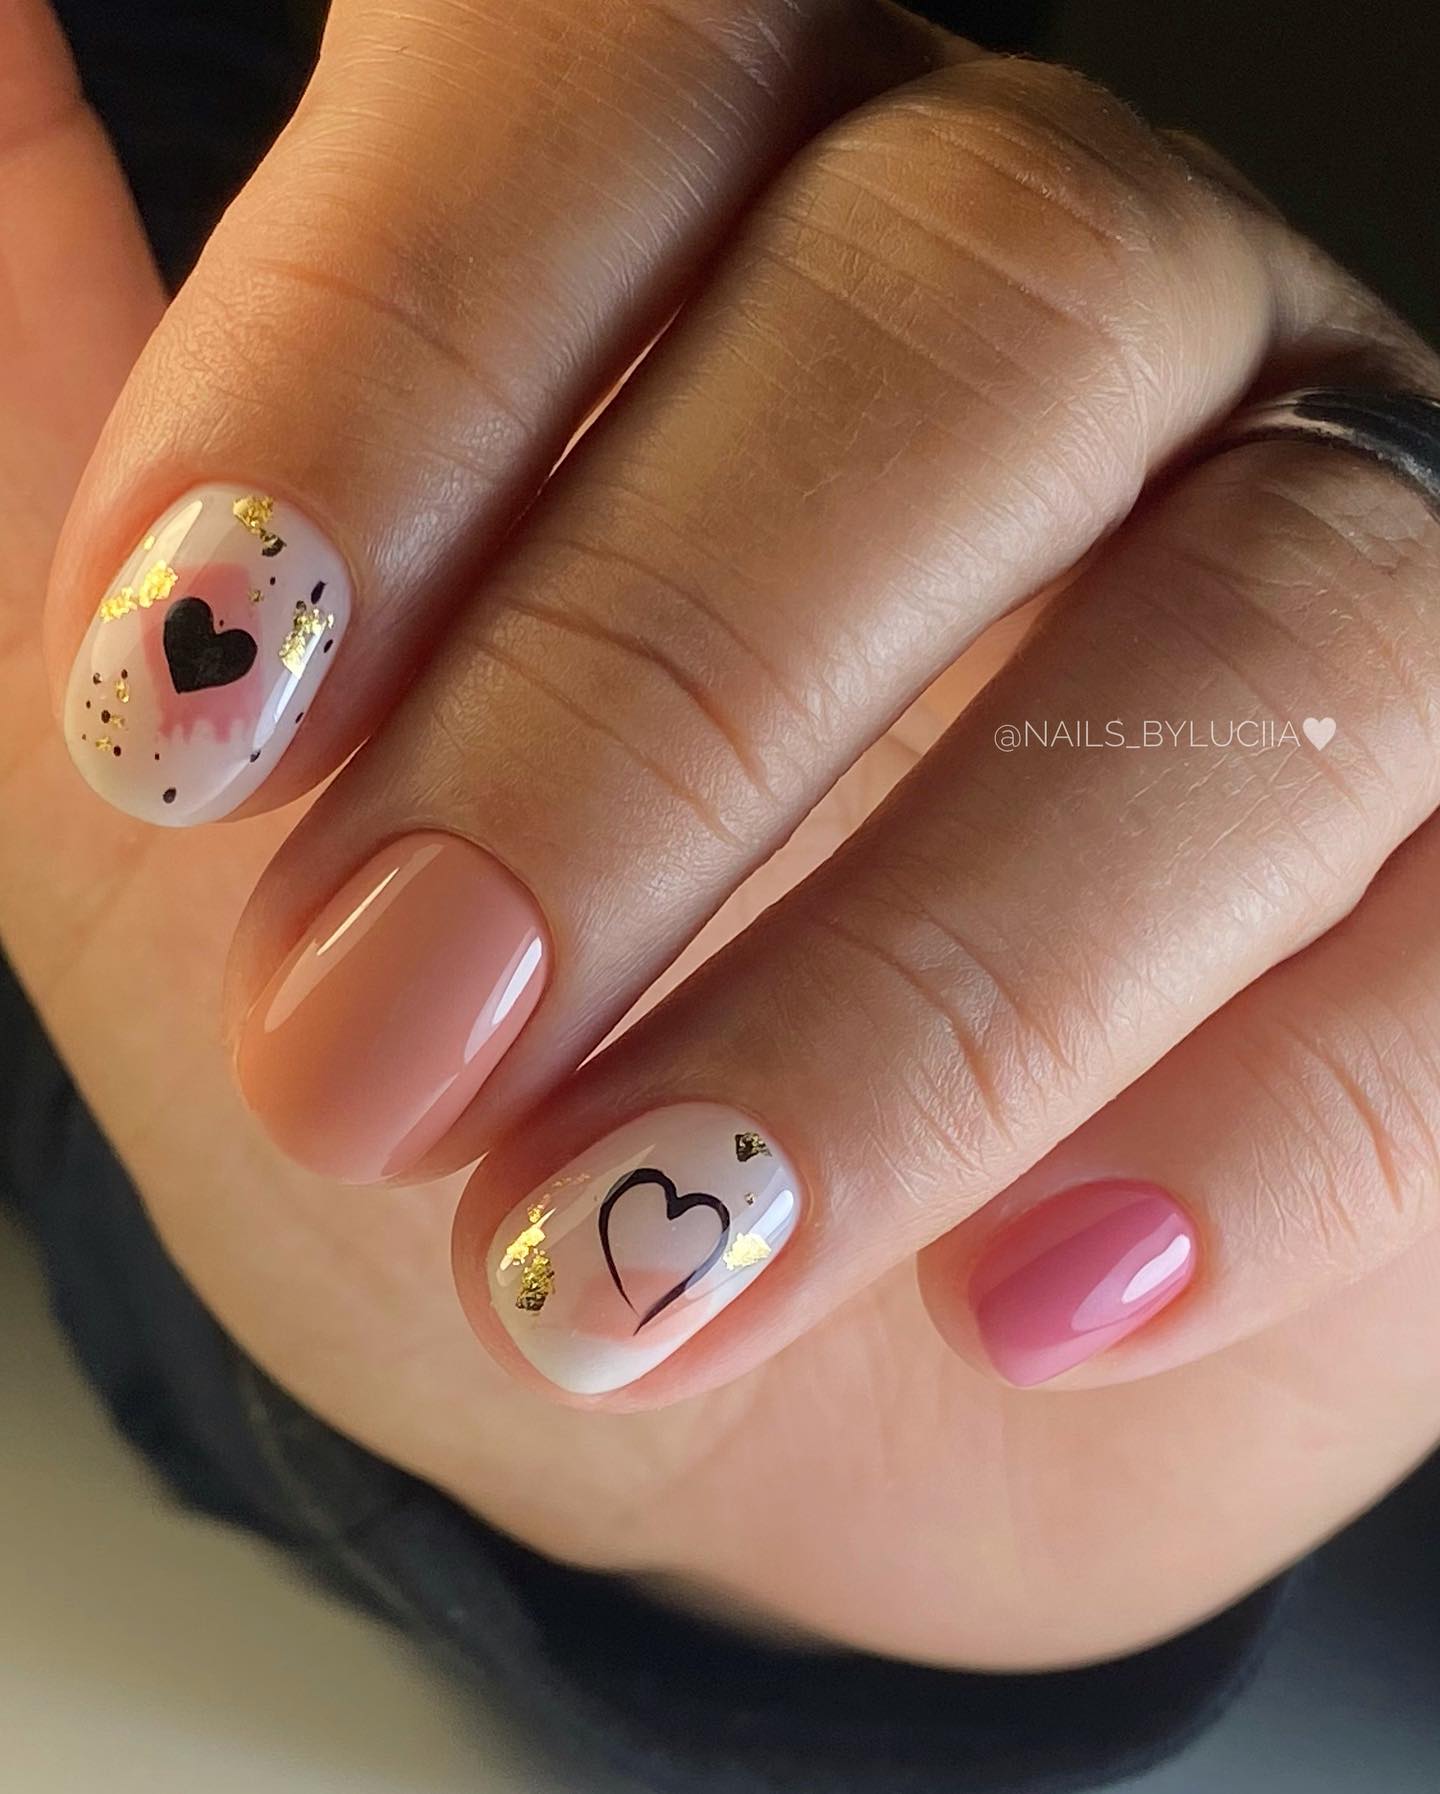 100+ Short Nail Designs You’ll Want To Try This Year images 81